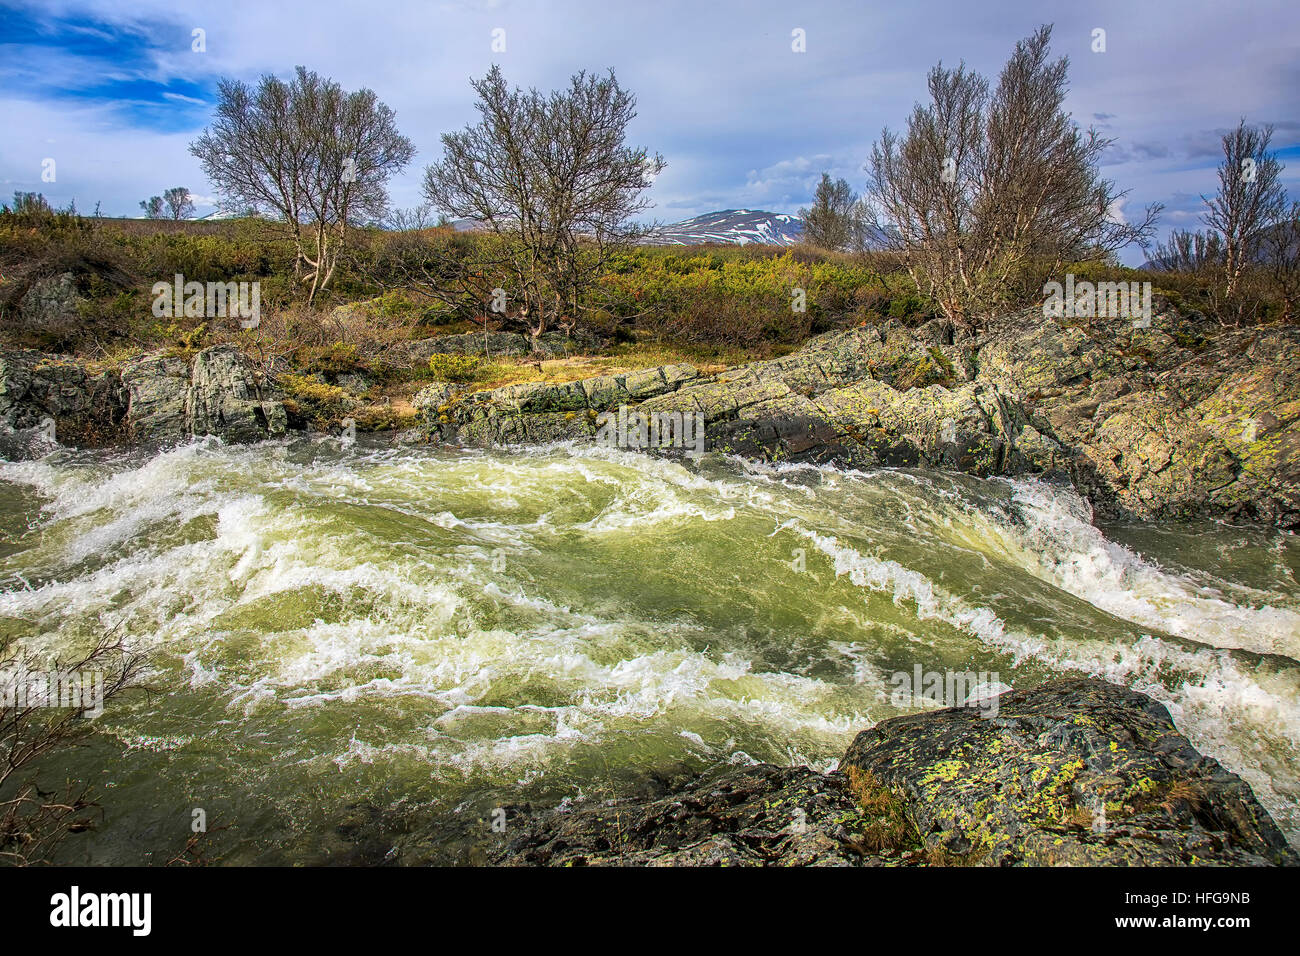 A raging river with natural alpine plants in the background. Stock Photo